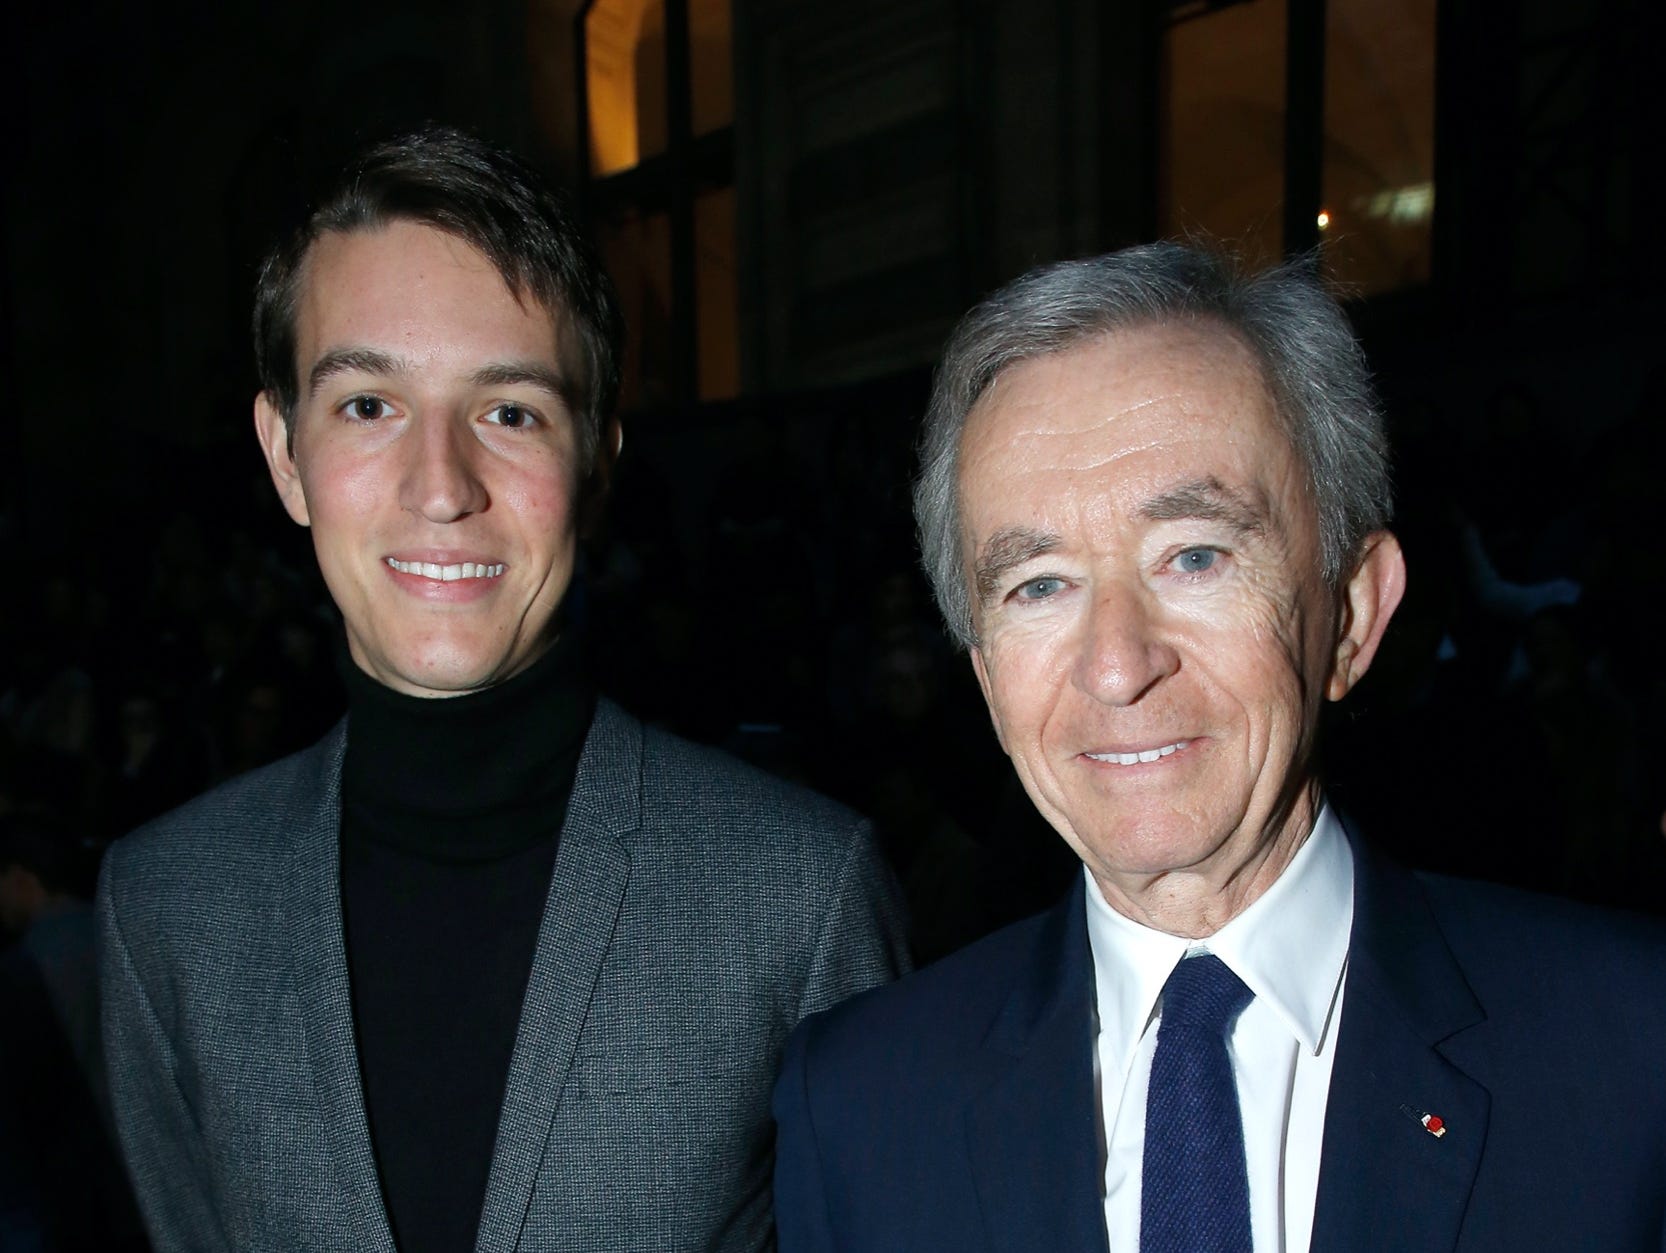 Alexandre Arnault, the 28-year-old son of Europe's richest man, is